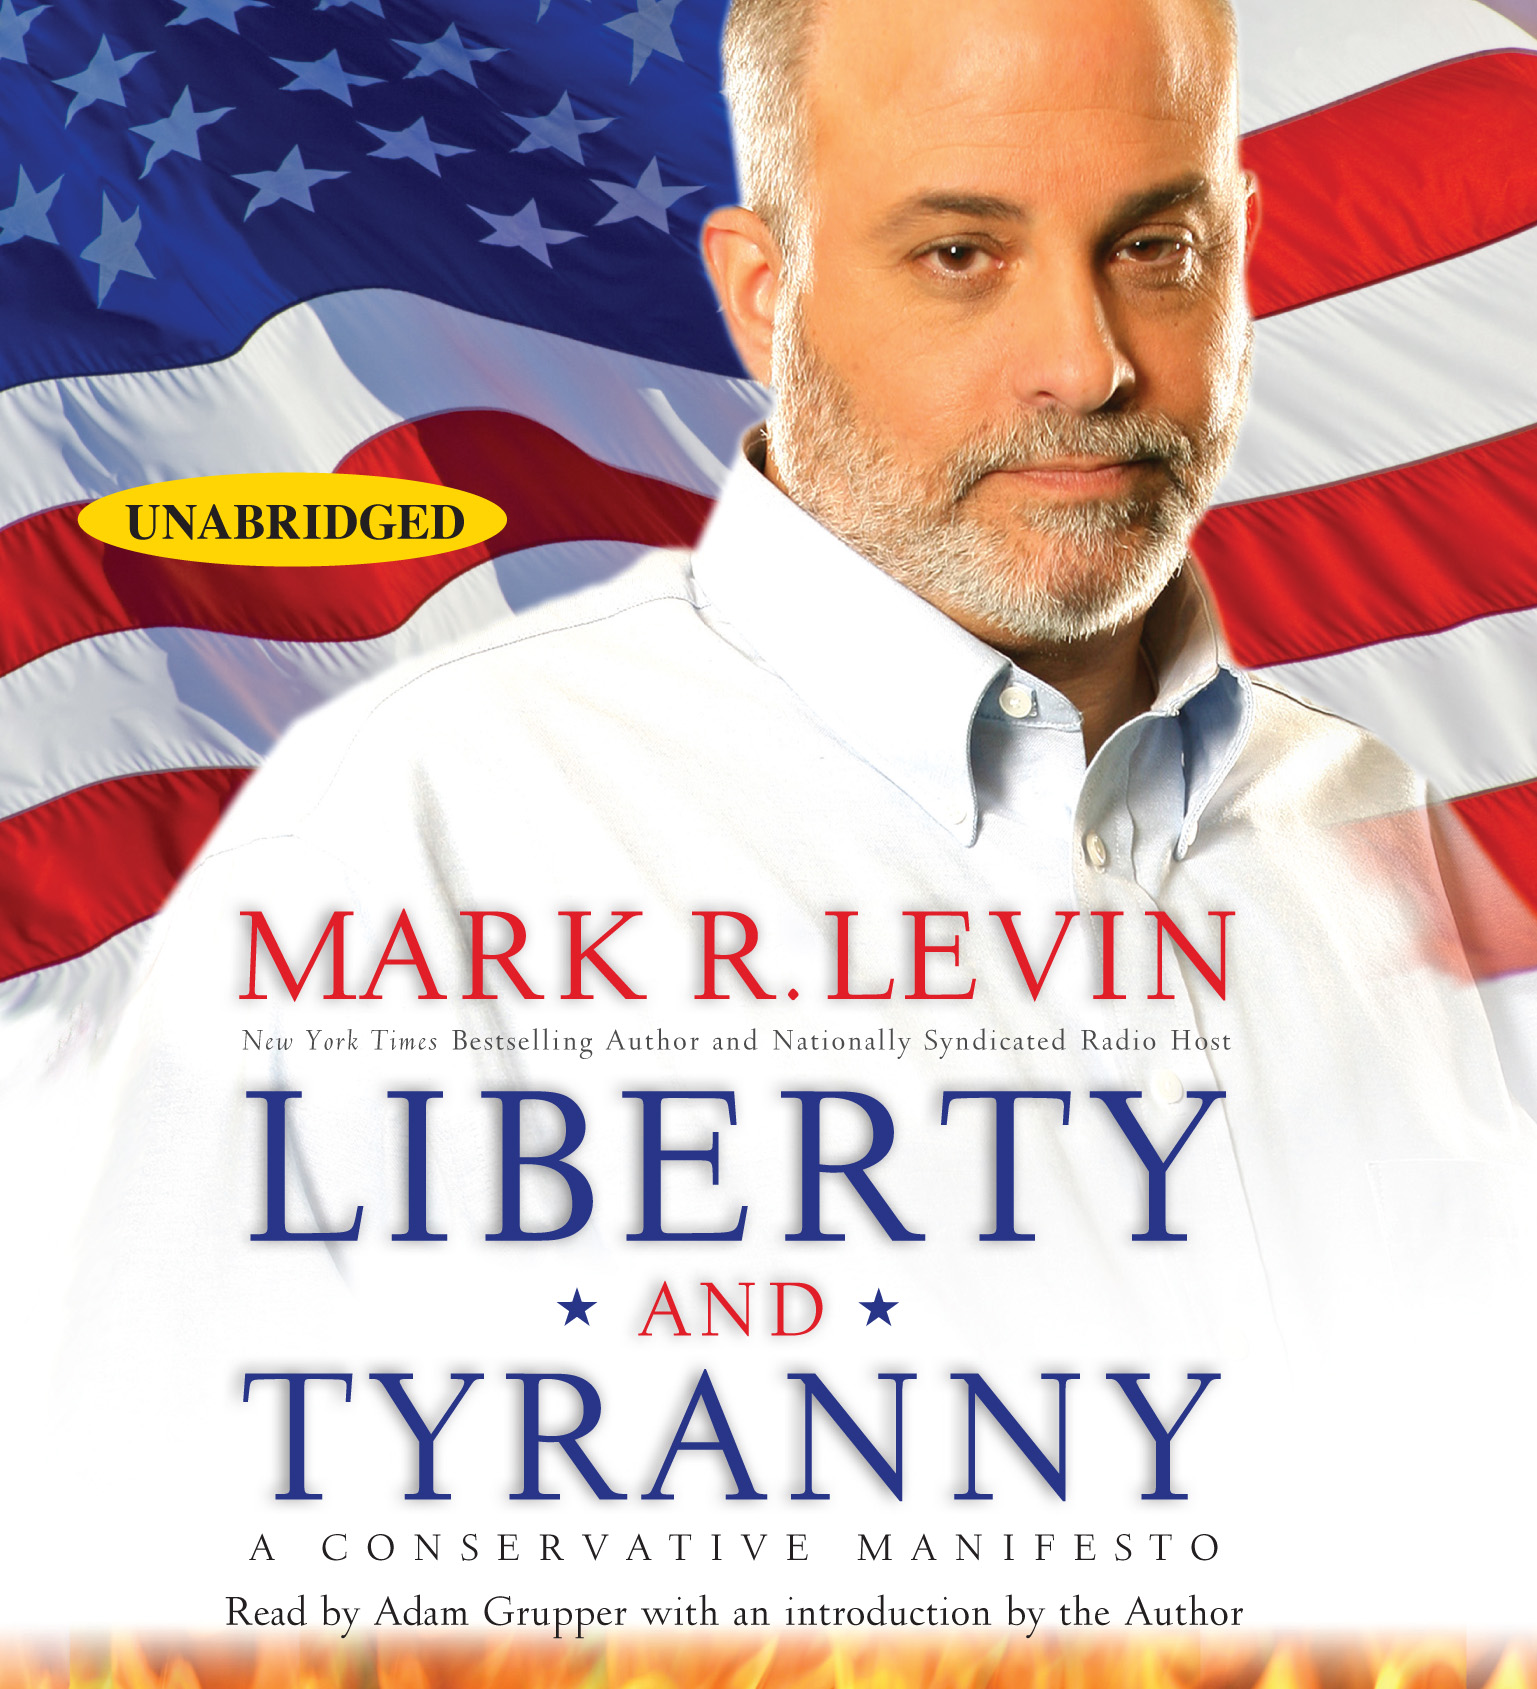 Cover image for Mark Levin's 'Liberty and Tyranny'